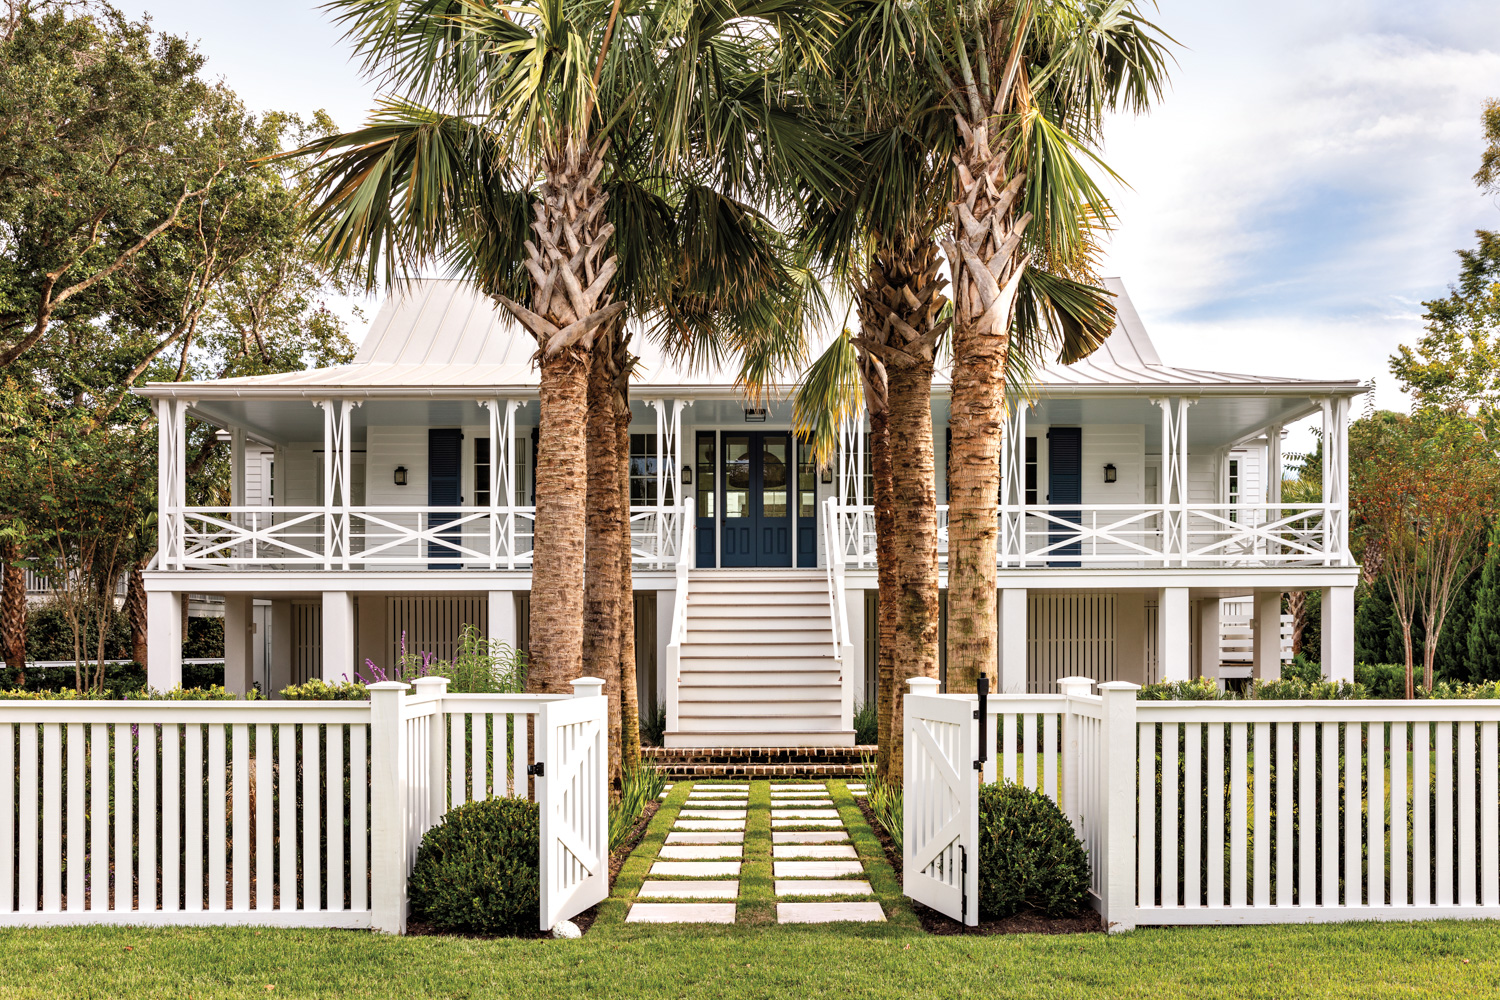 exterior of a beach house with palm trees lining the walkway to the front door